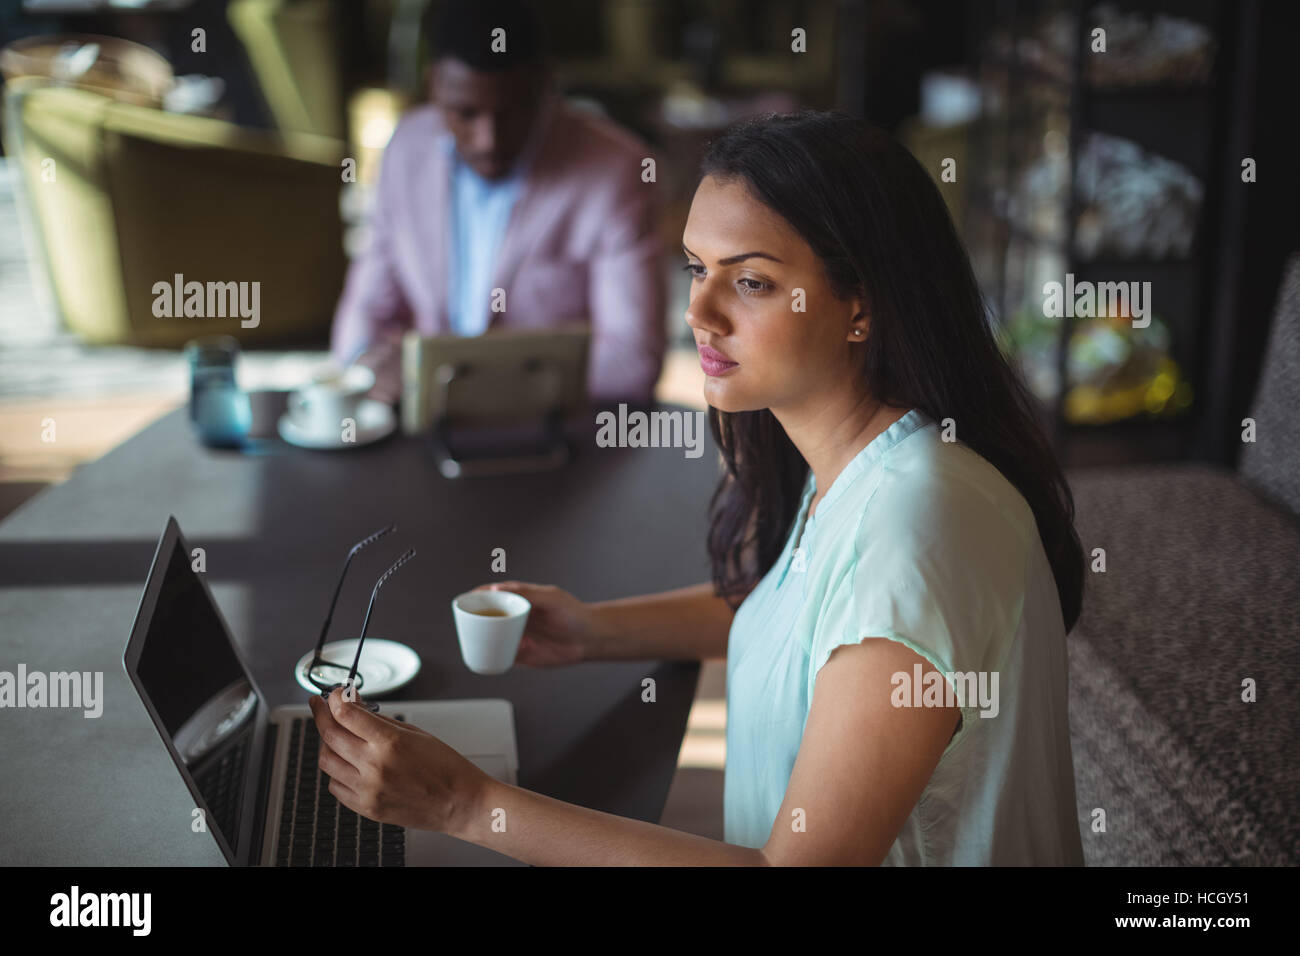 Thoughtful businesswoman holding coffee cup sitting at her desk Stock Photo